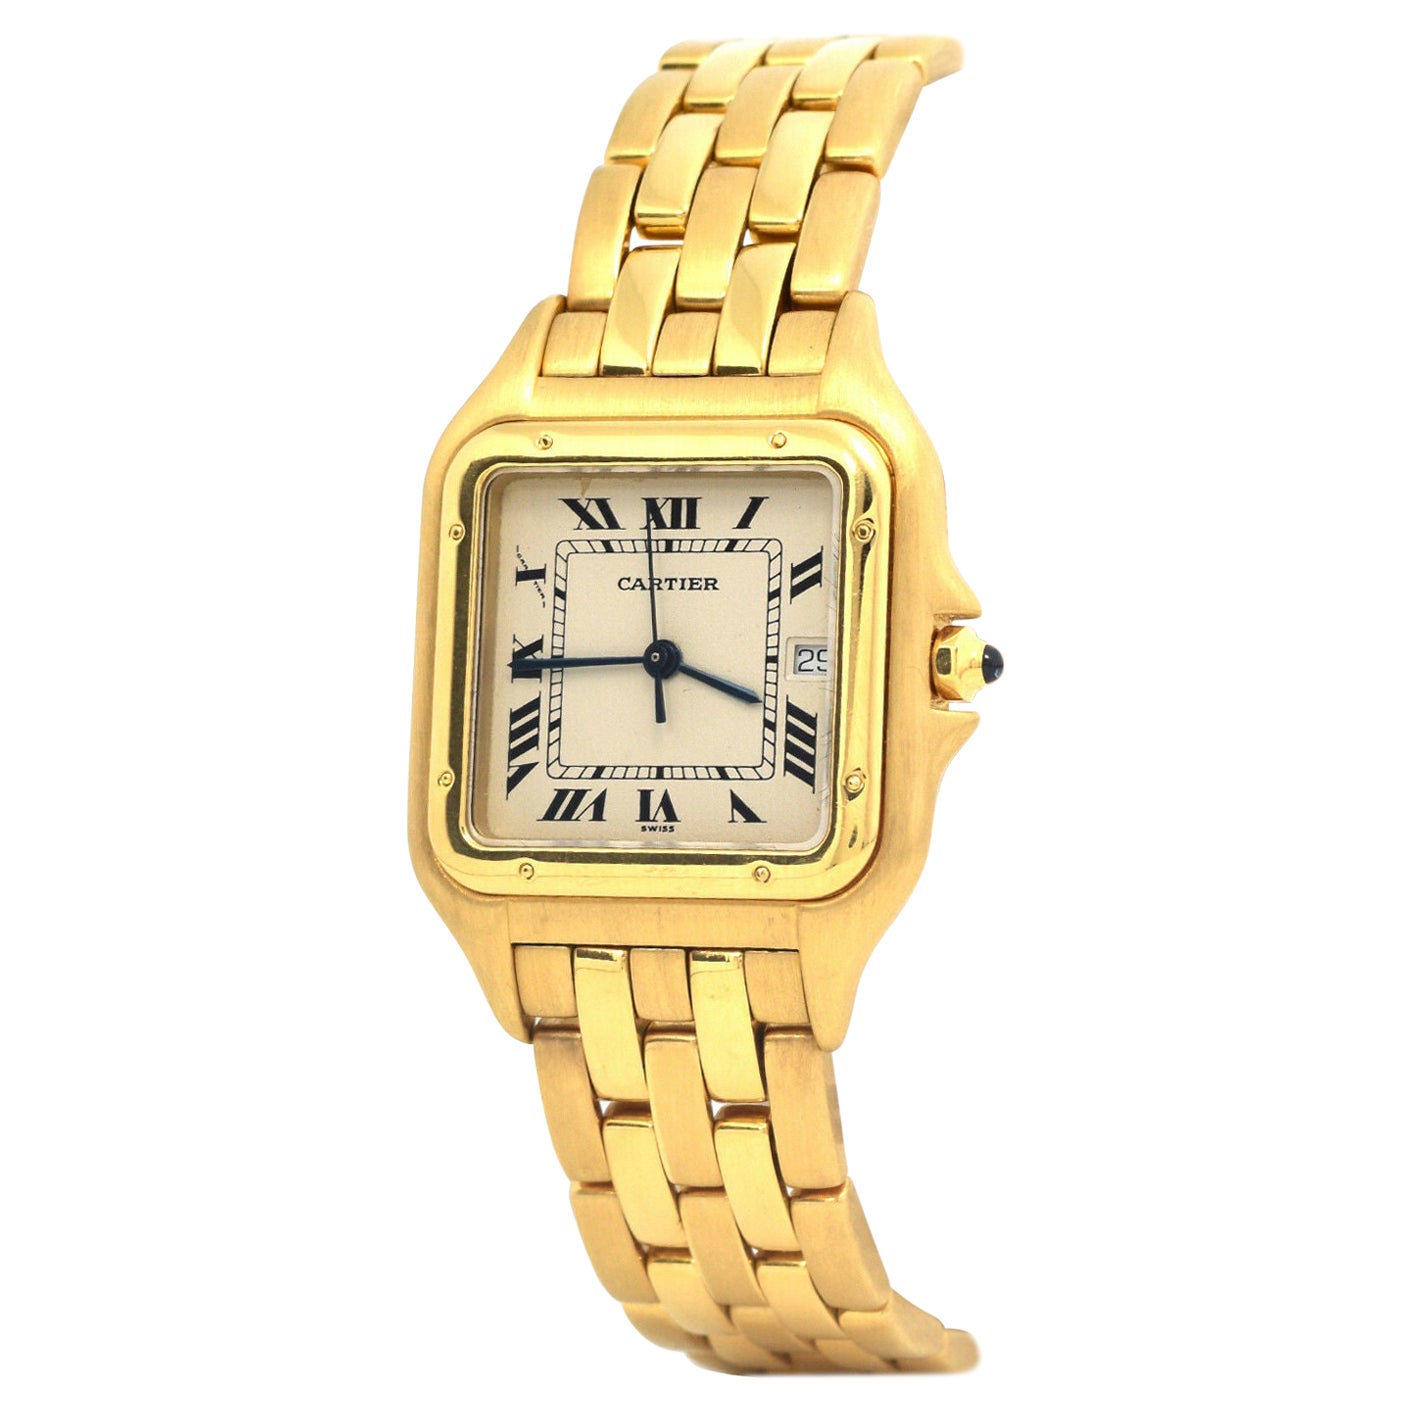 Cartier Panthere 887968 Medium in 18k Yellow Gold and Bracelet with Box & Papers